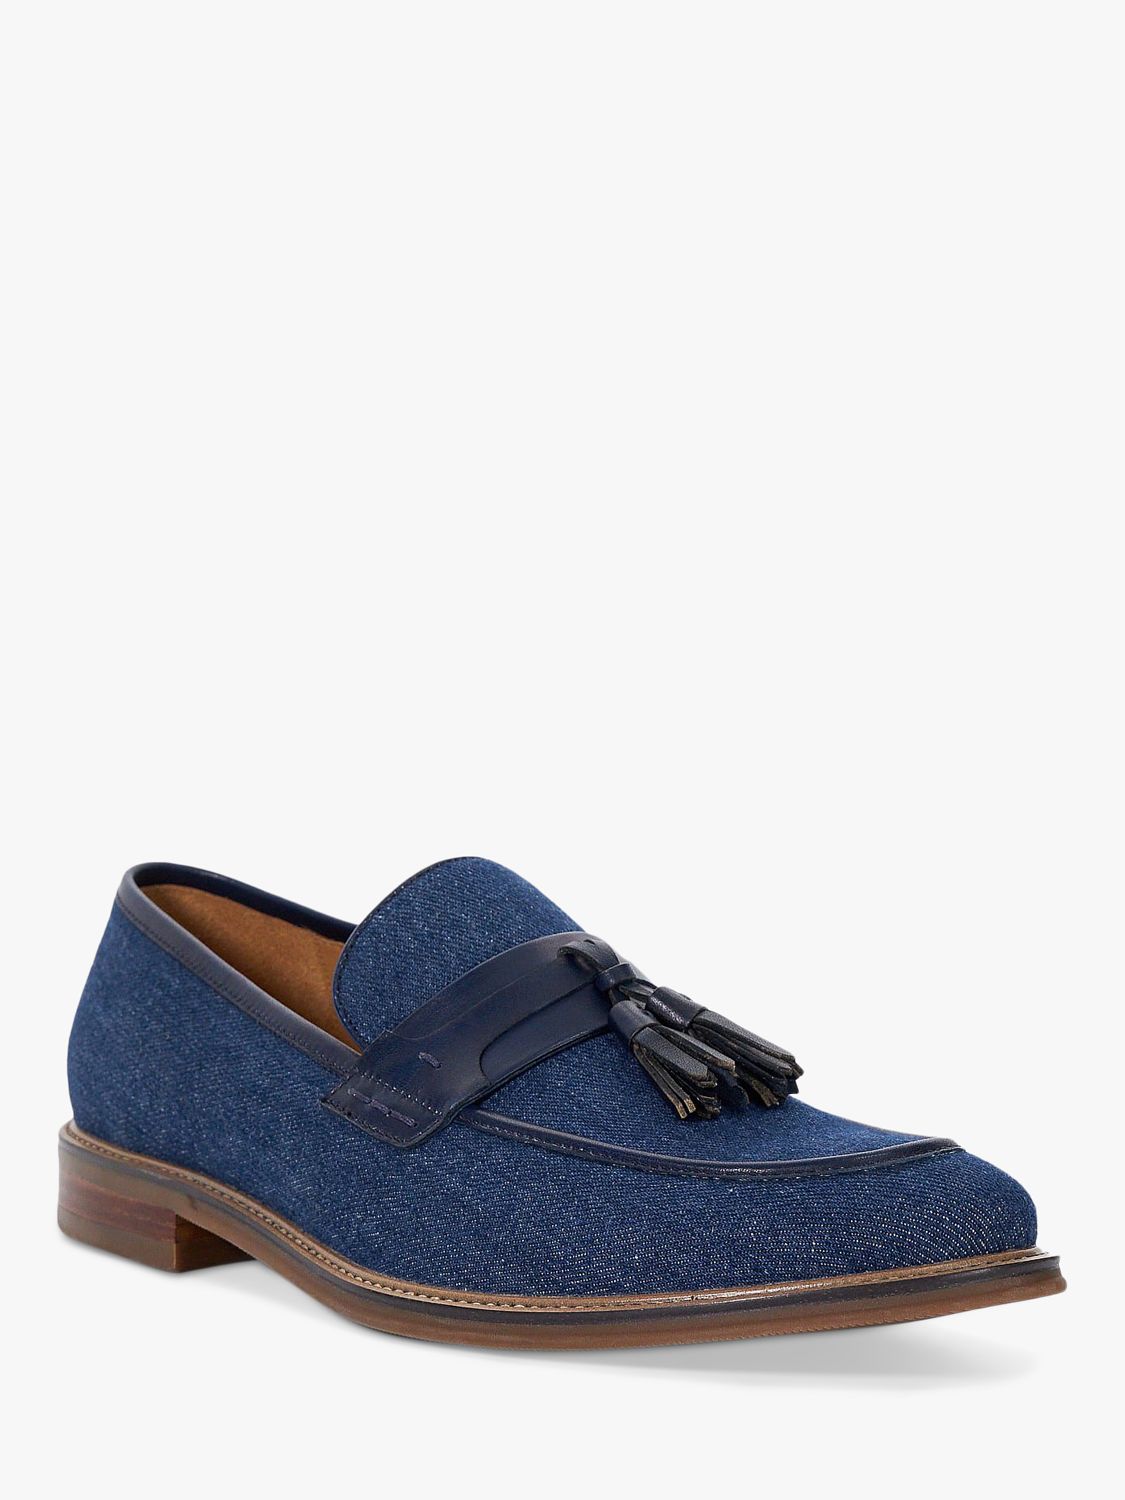 Buy Dune Sought Leather Loafers Online at johnlewis.com